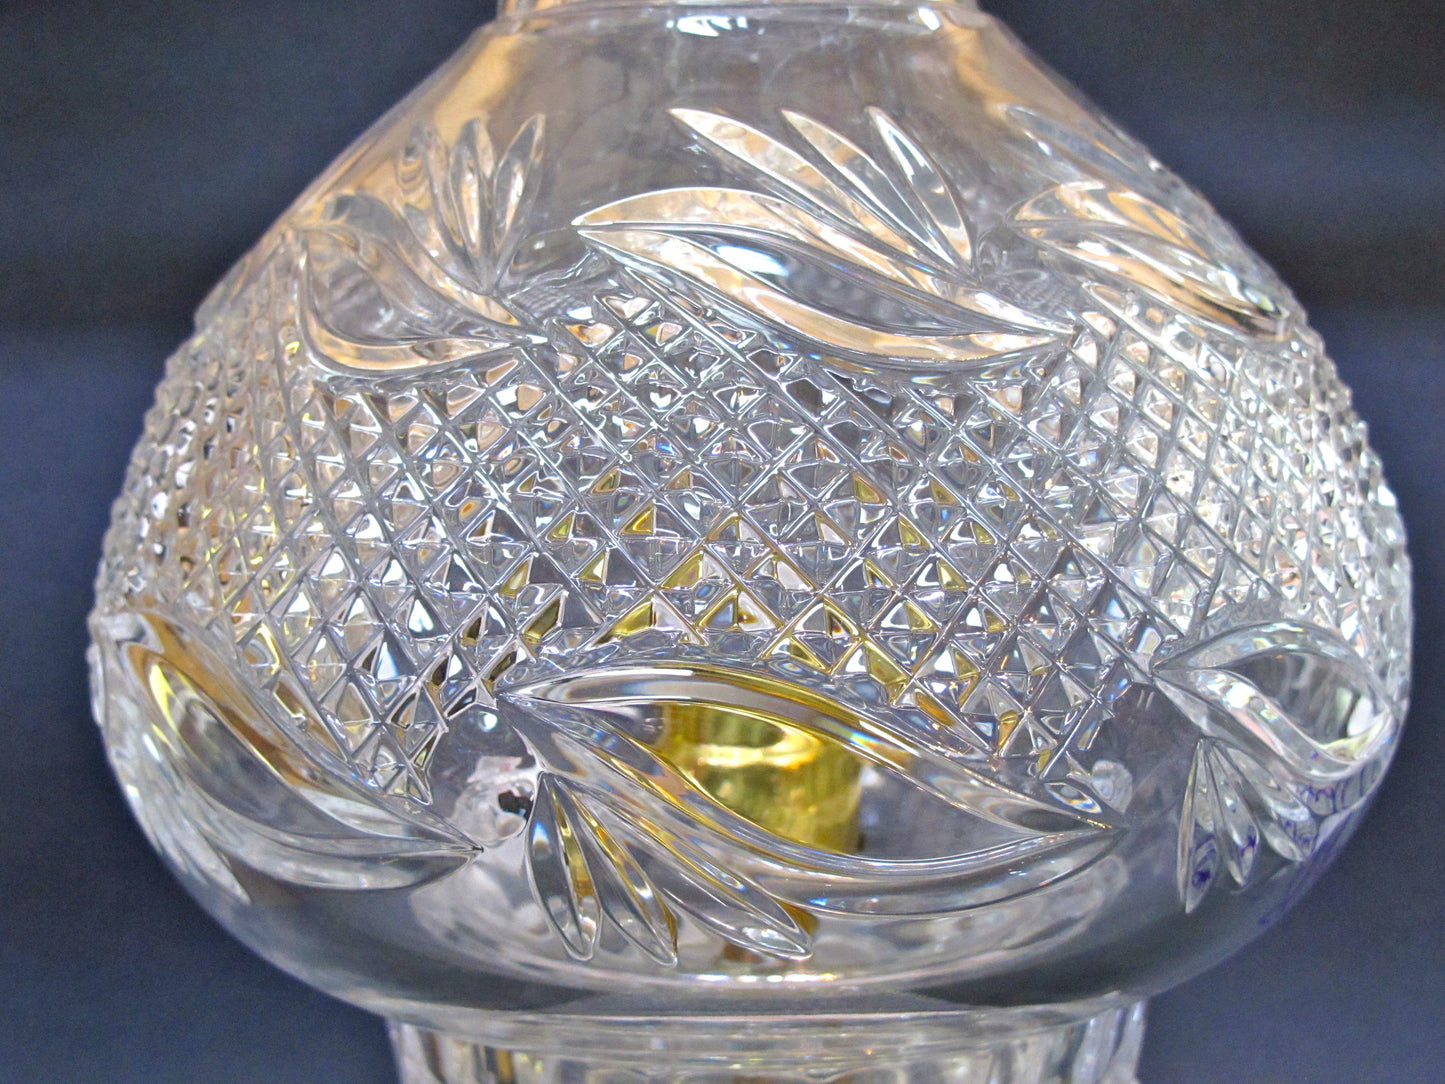 Cut glass lamp crystal 2 part - O'Rourke crystal awards & gifts abp cut glass